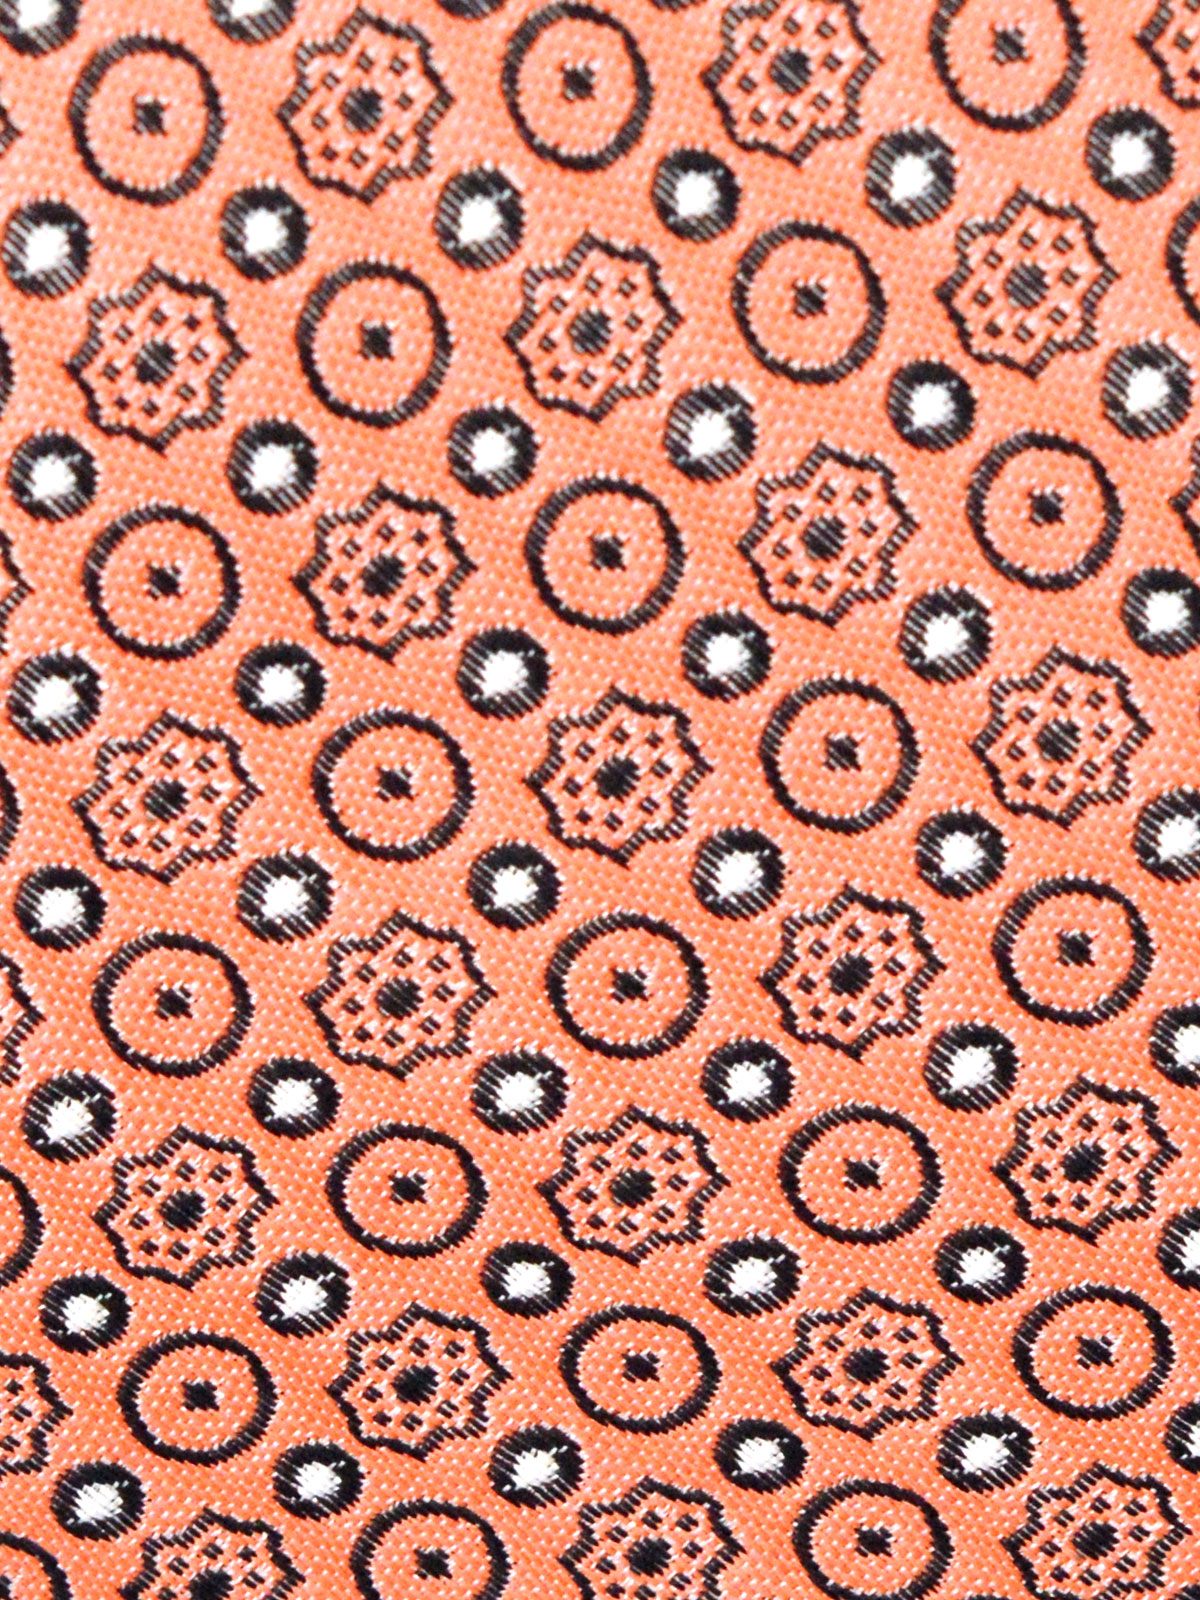  tie in light coral in circles  - 10149 - € 14.06 img2